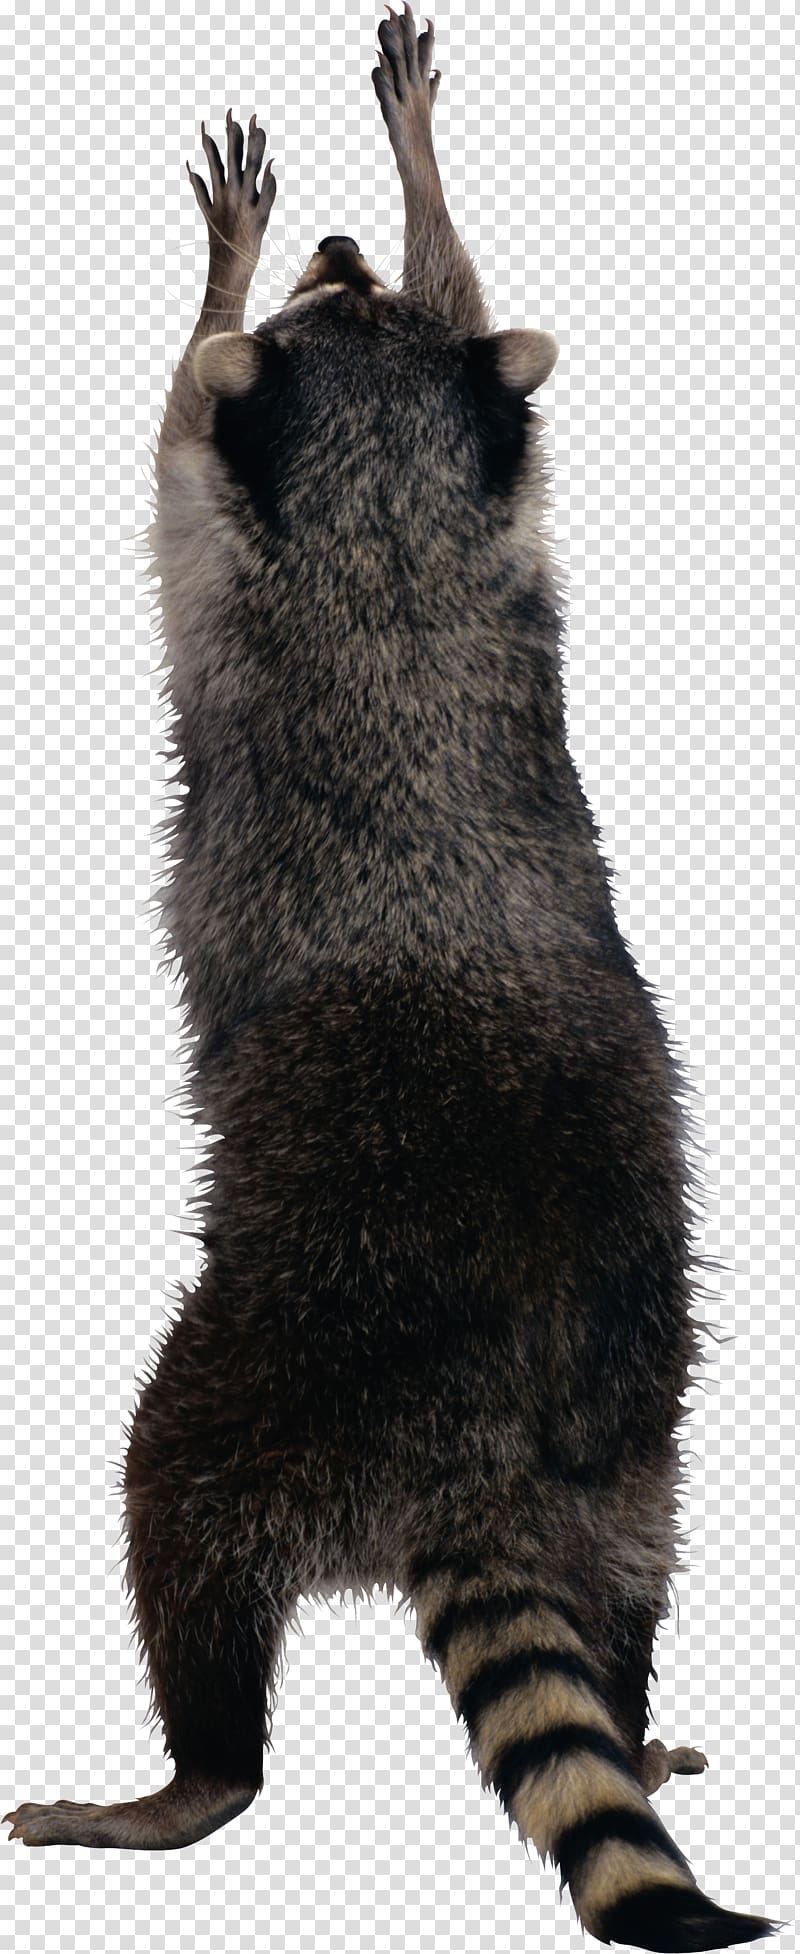 Raccoon Squirrel, Raccoon transparent background PNG clipart